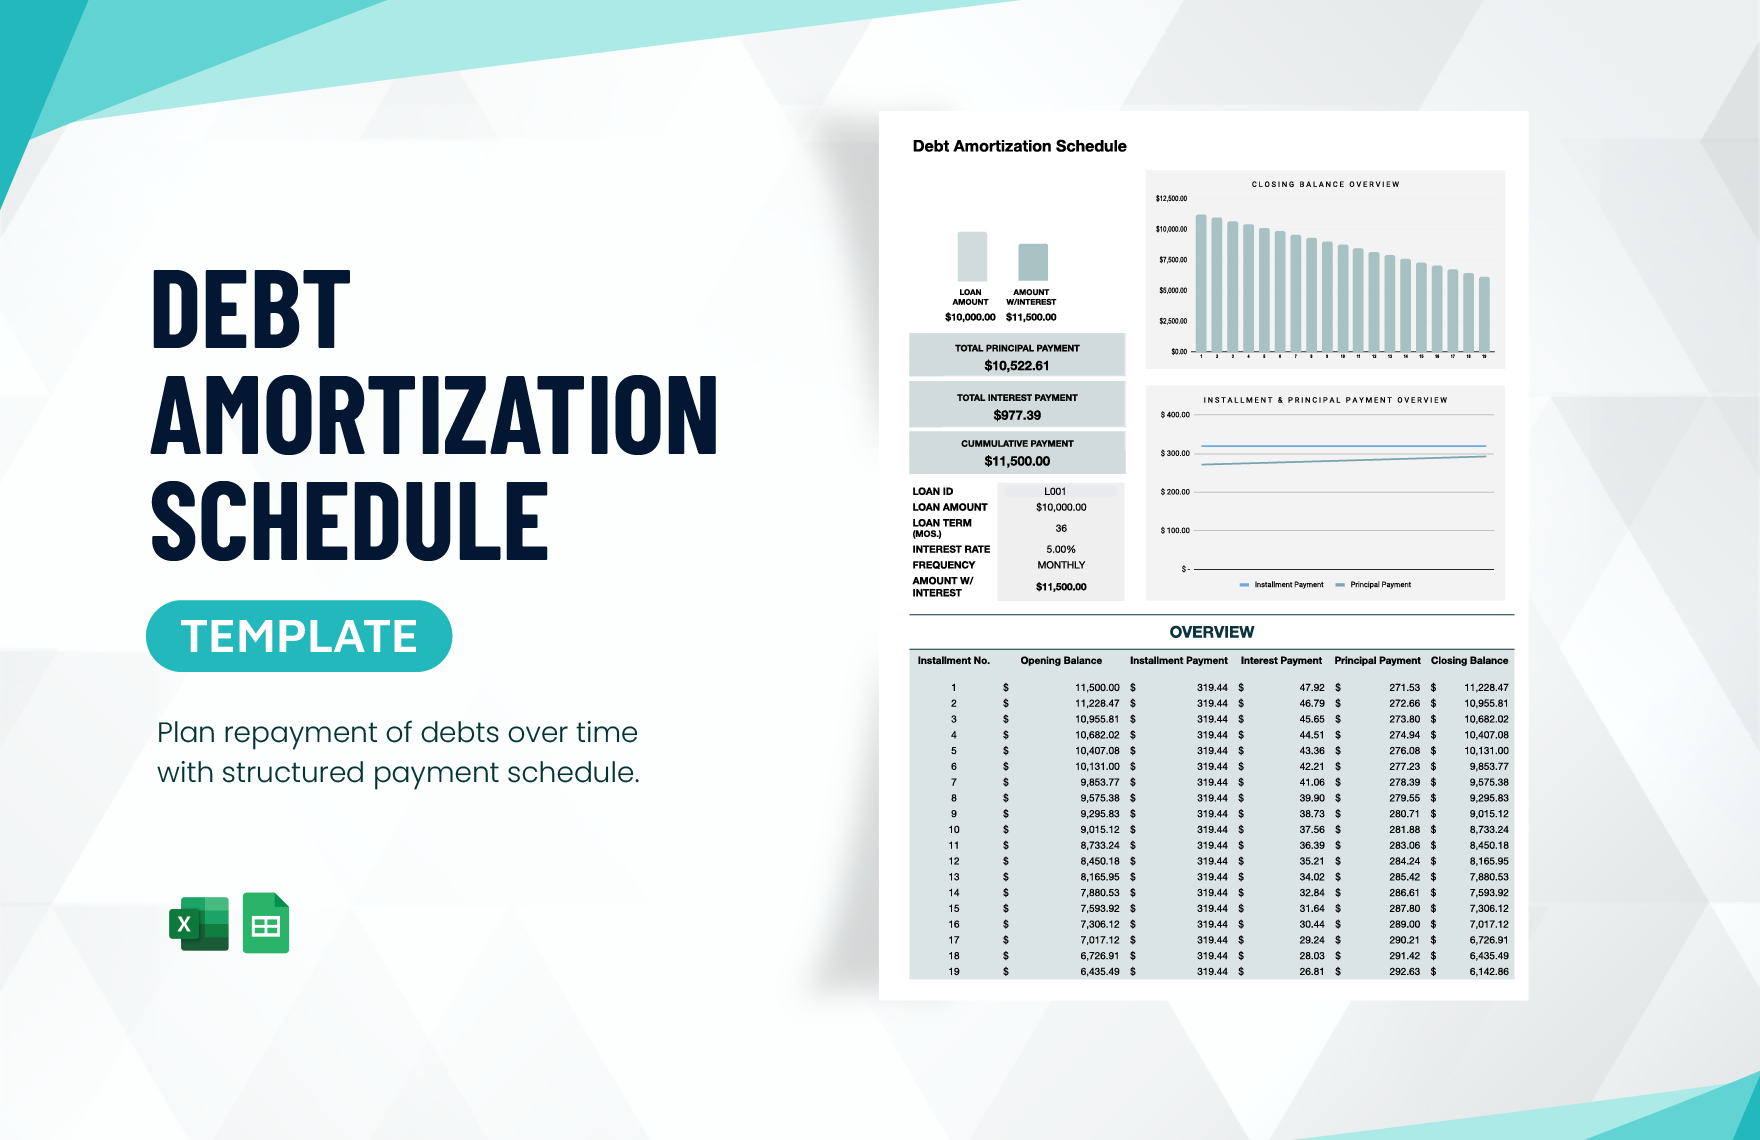 Debt Amortization Schedule Template in Excel, Google Sheets